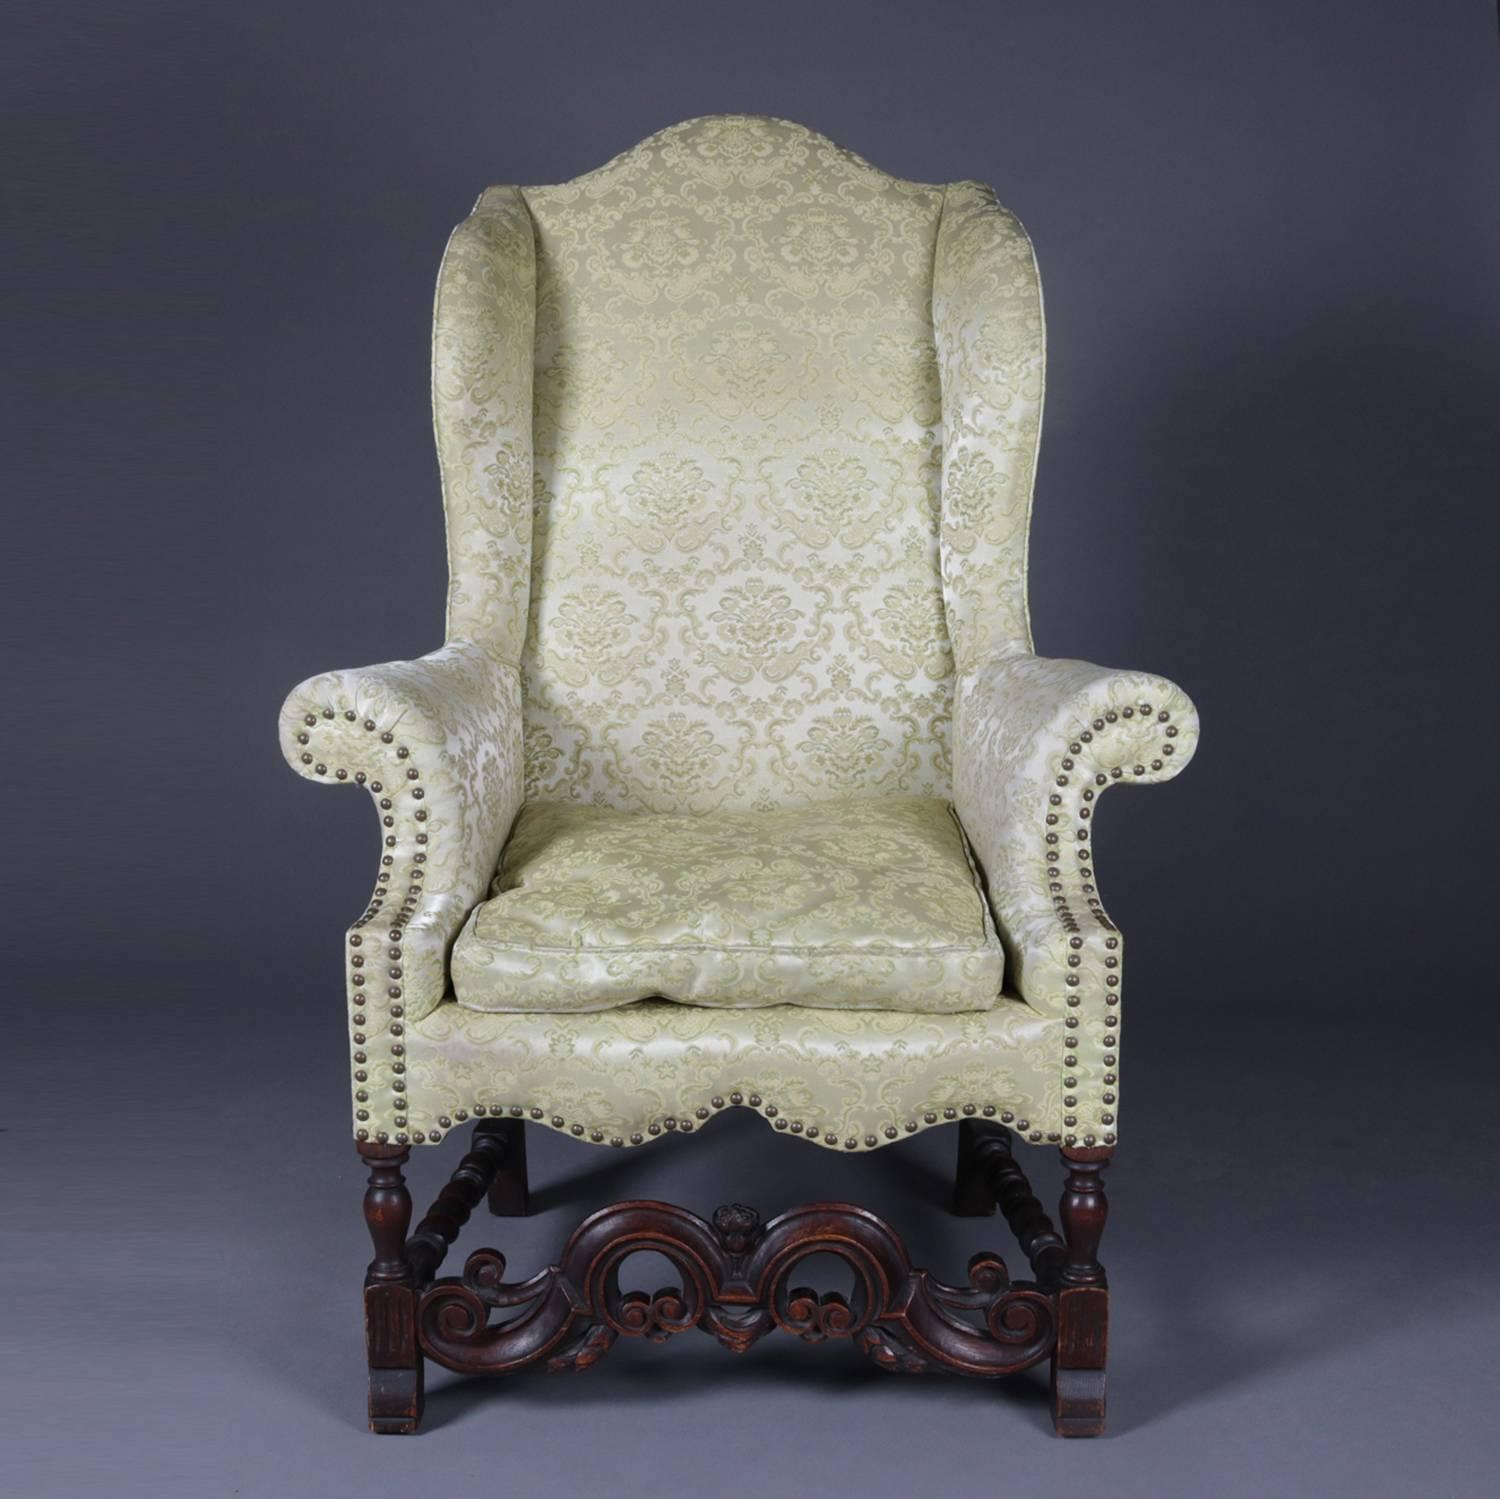 Antique English Edwardian upholstered wingback armchair features scalloped skirt and scrolled arms, carved mahogany frame with pierced foliate and scroll form front stretcher with barley twist side stretchers, circa 1910

Measures: 51